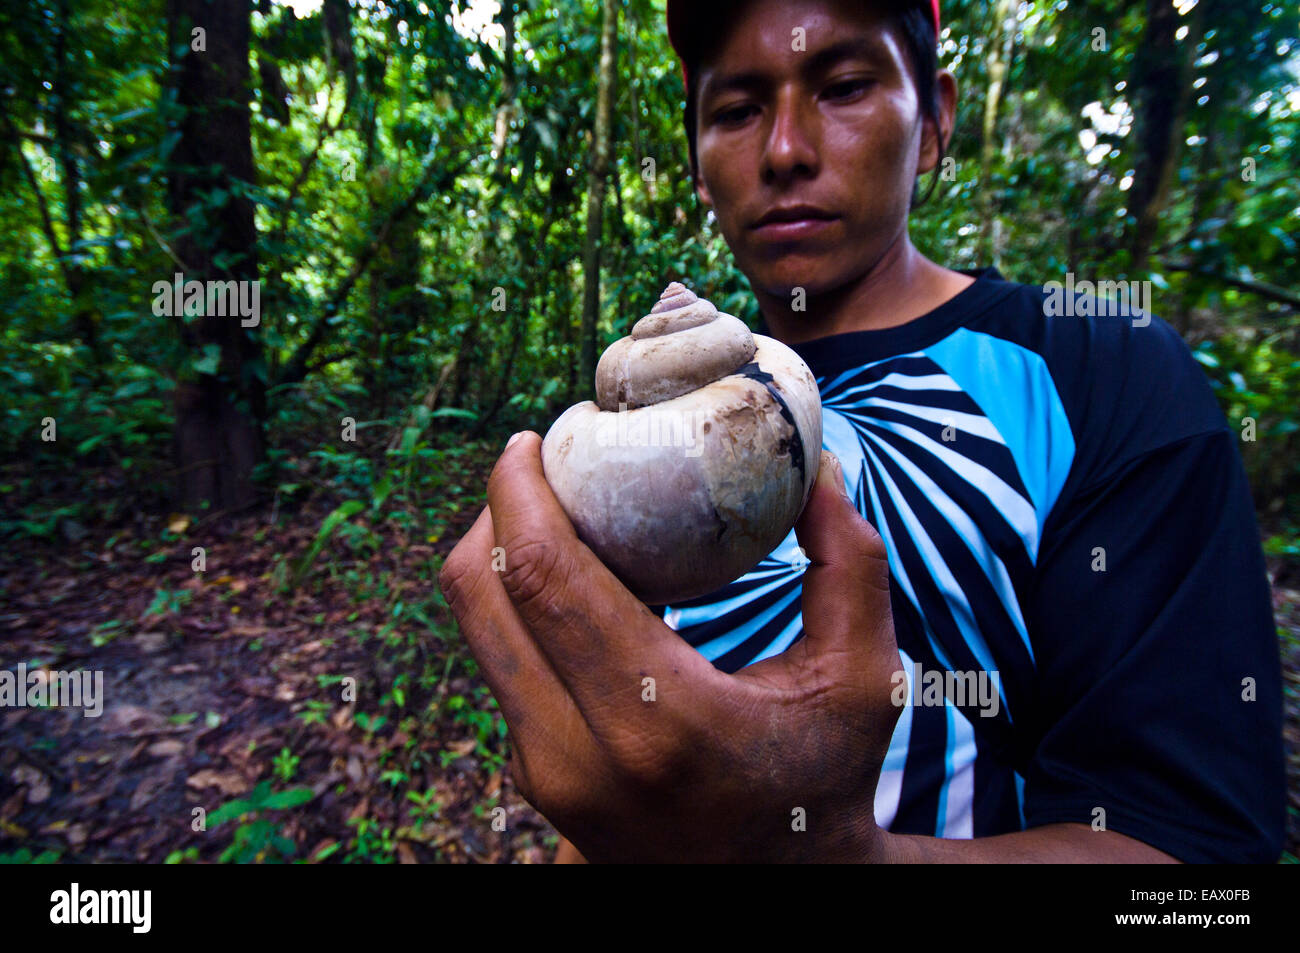 A villager in the rainforest holds a the sun-bleached shell of a Apple Snail. Stock Photo